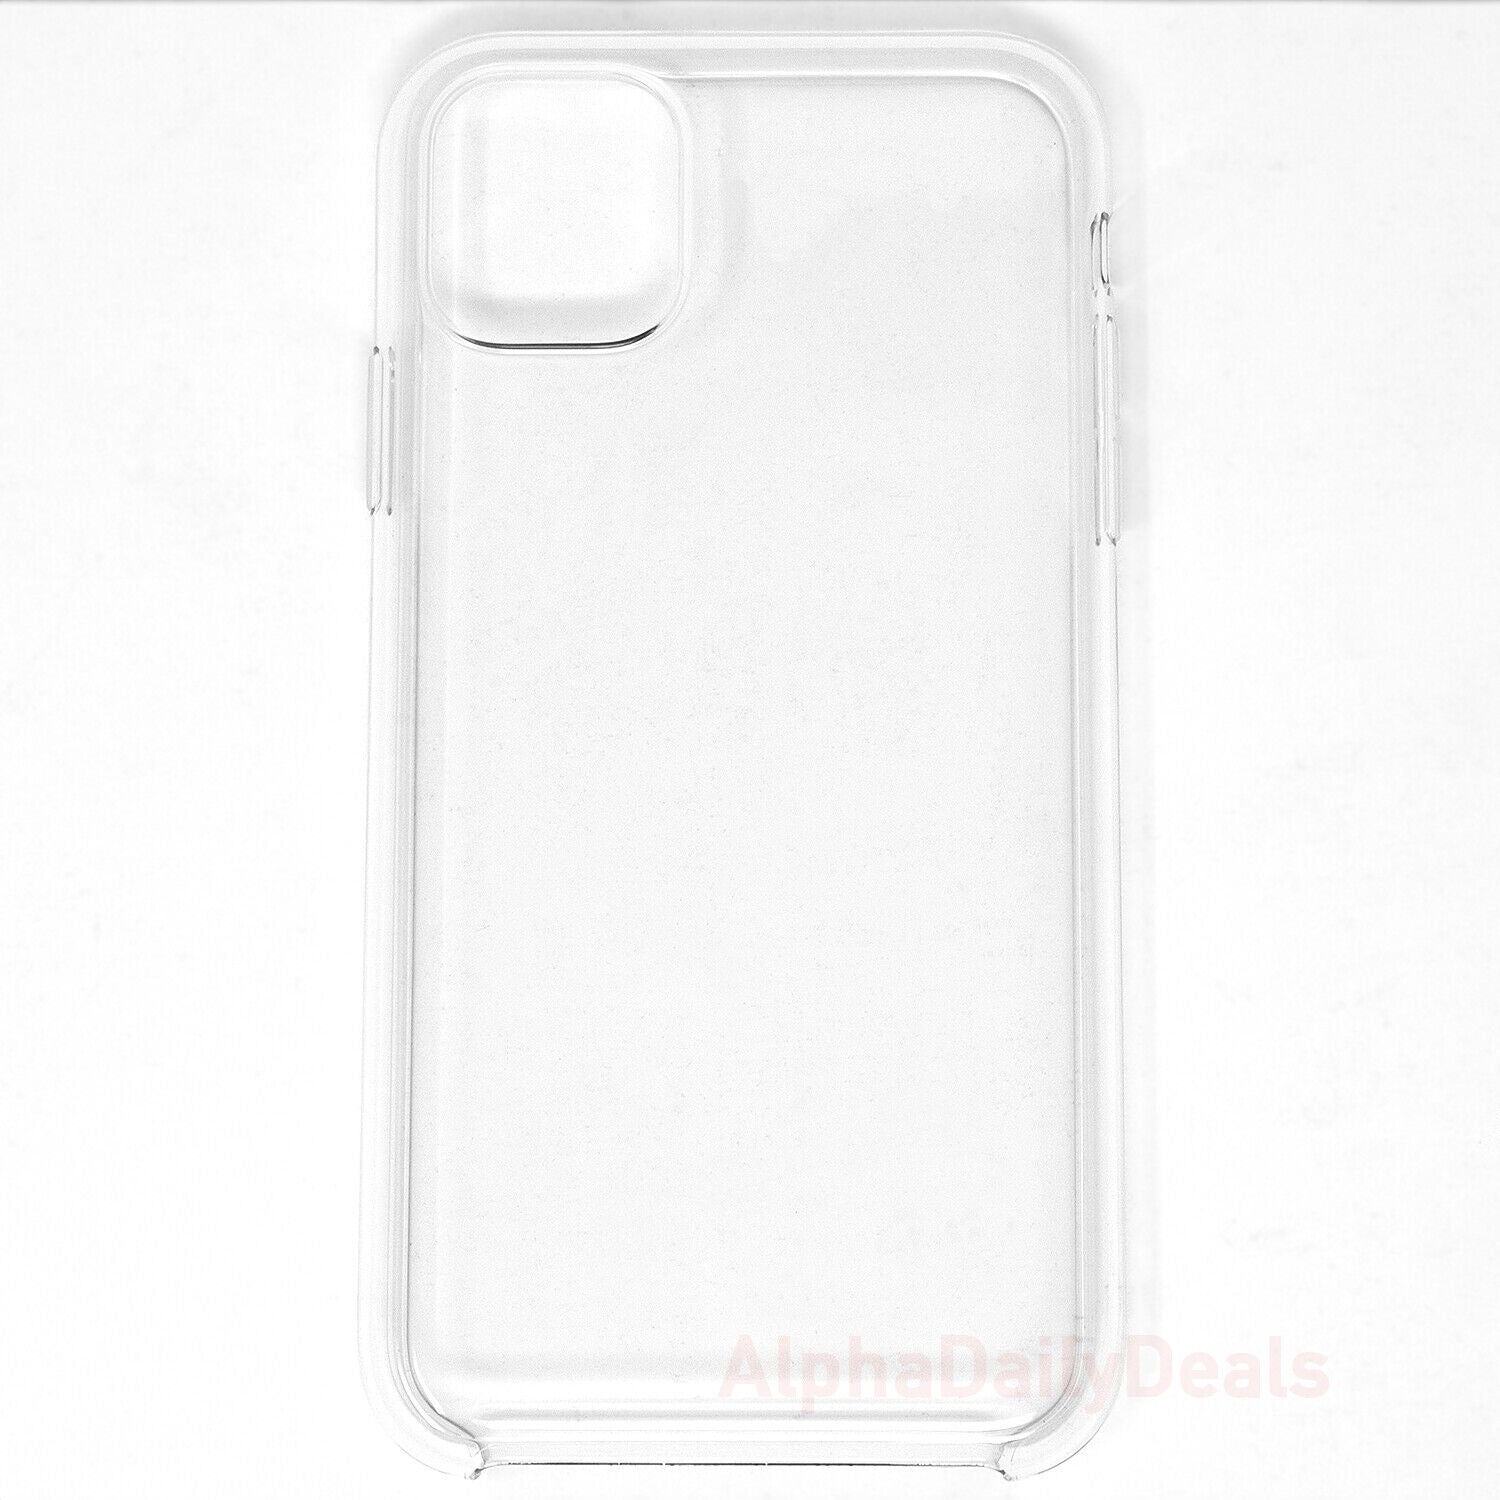 Genuine OEM Apple iPhone 11 Clear Protective Case NEW SEALED